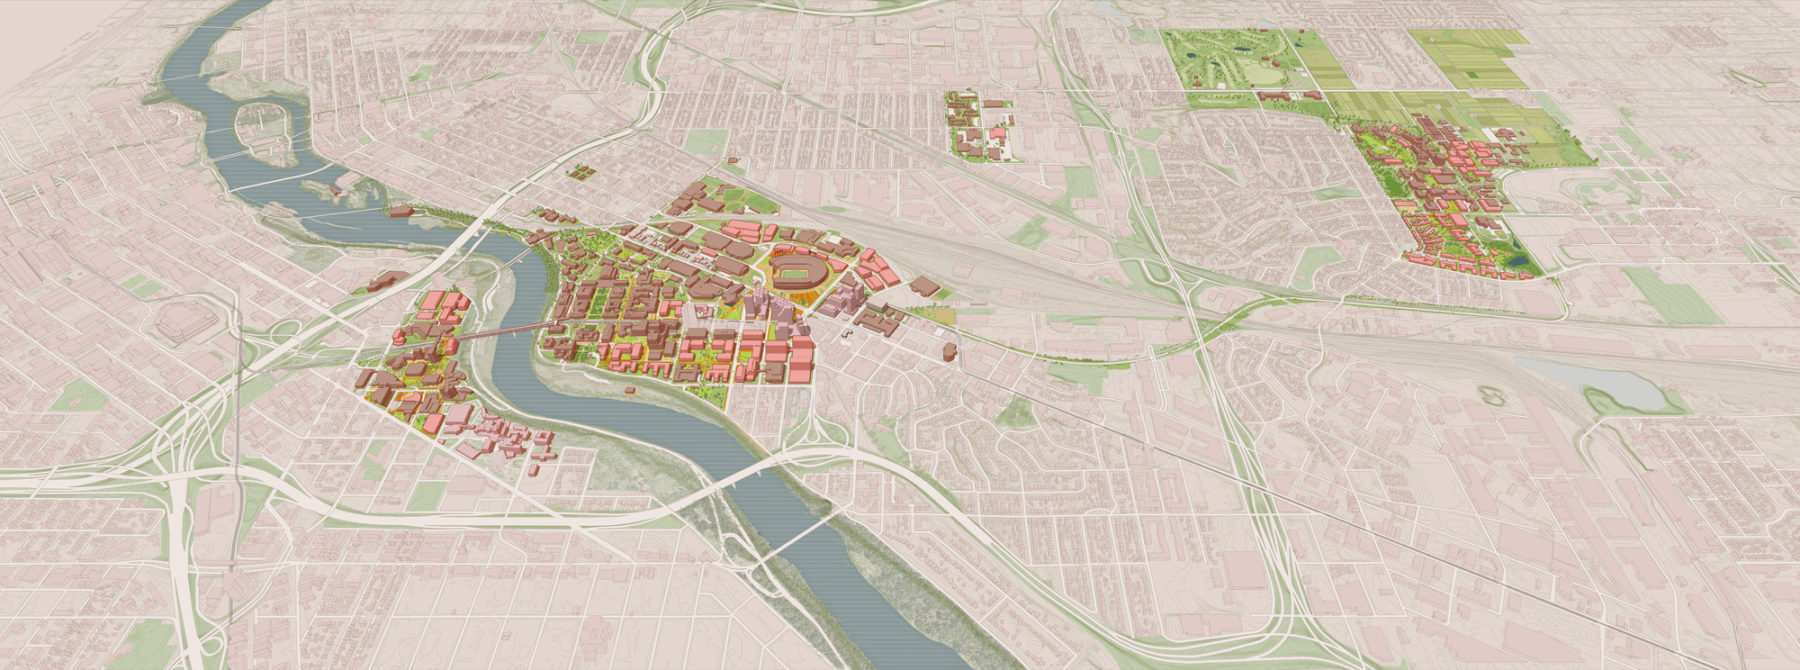 rendering of an aerial view of the University of Minnesota Campus